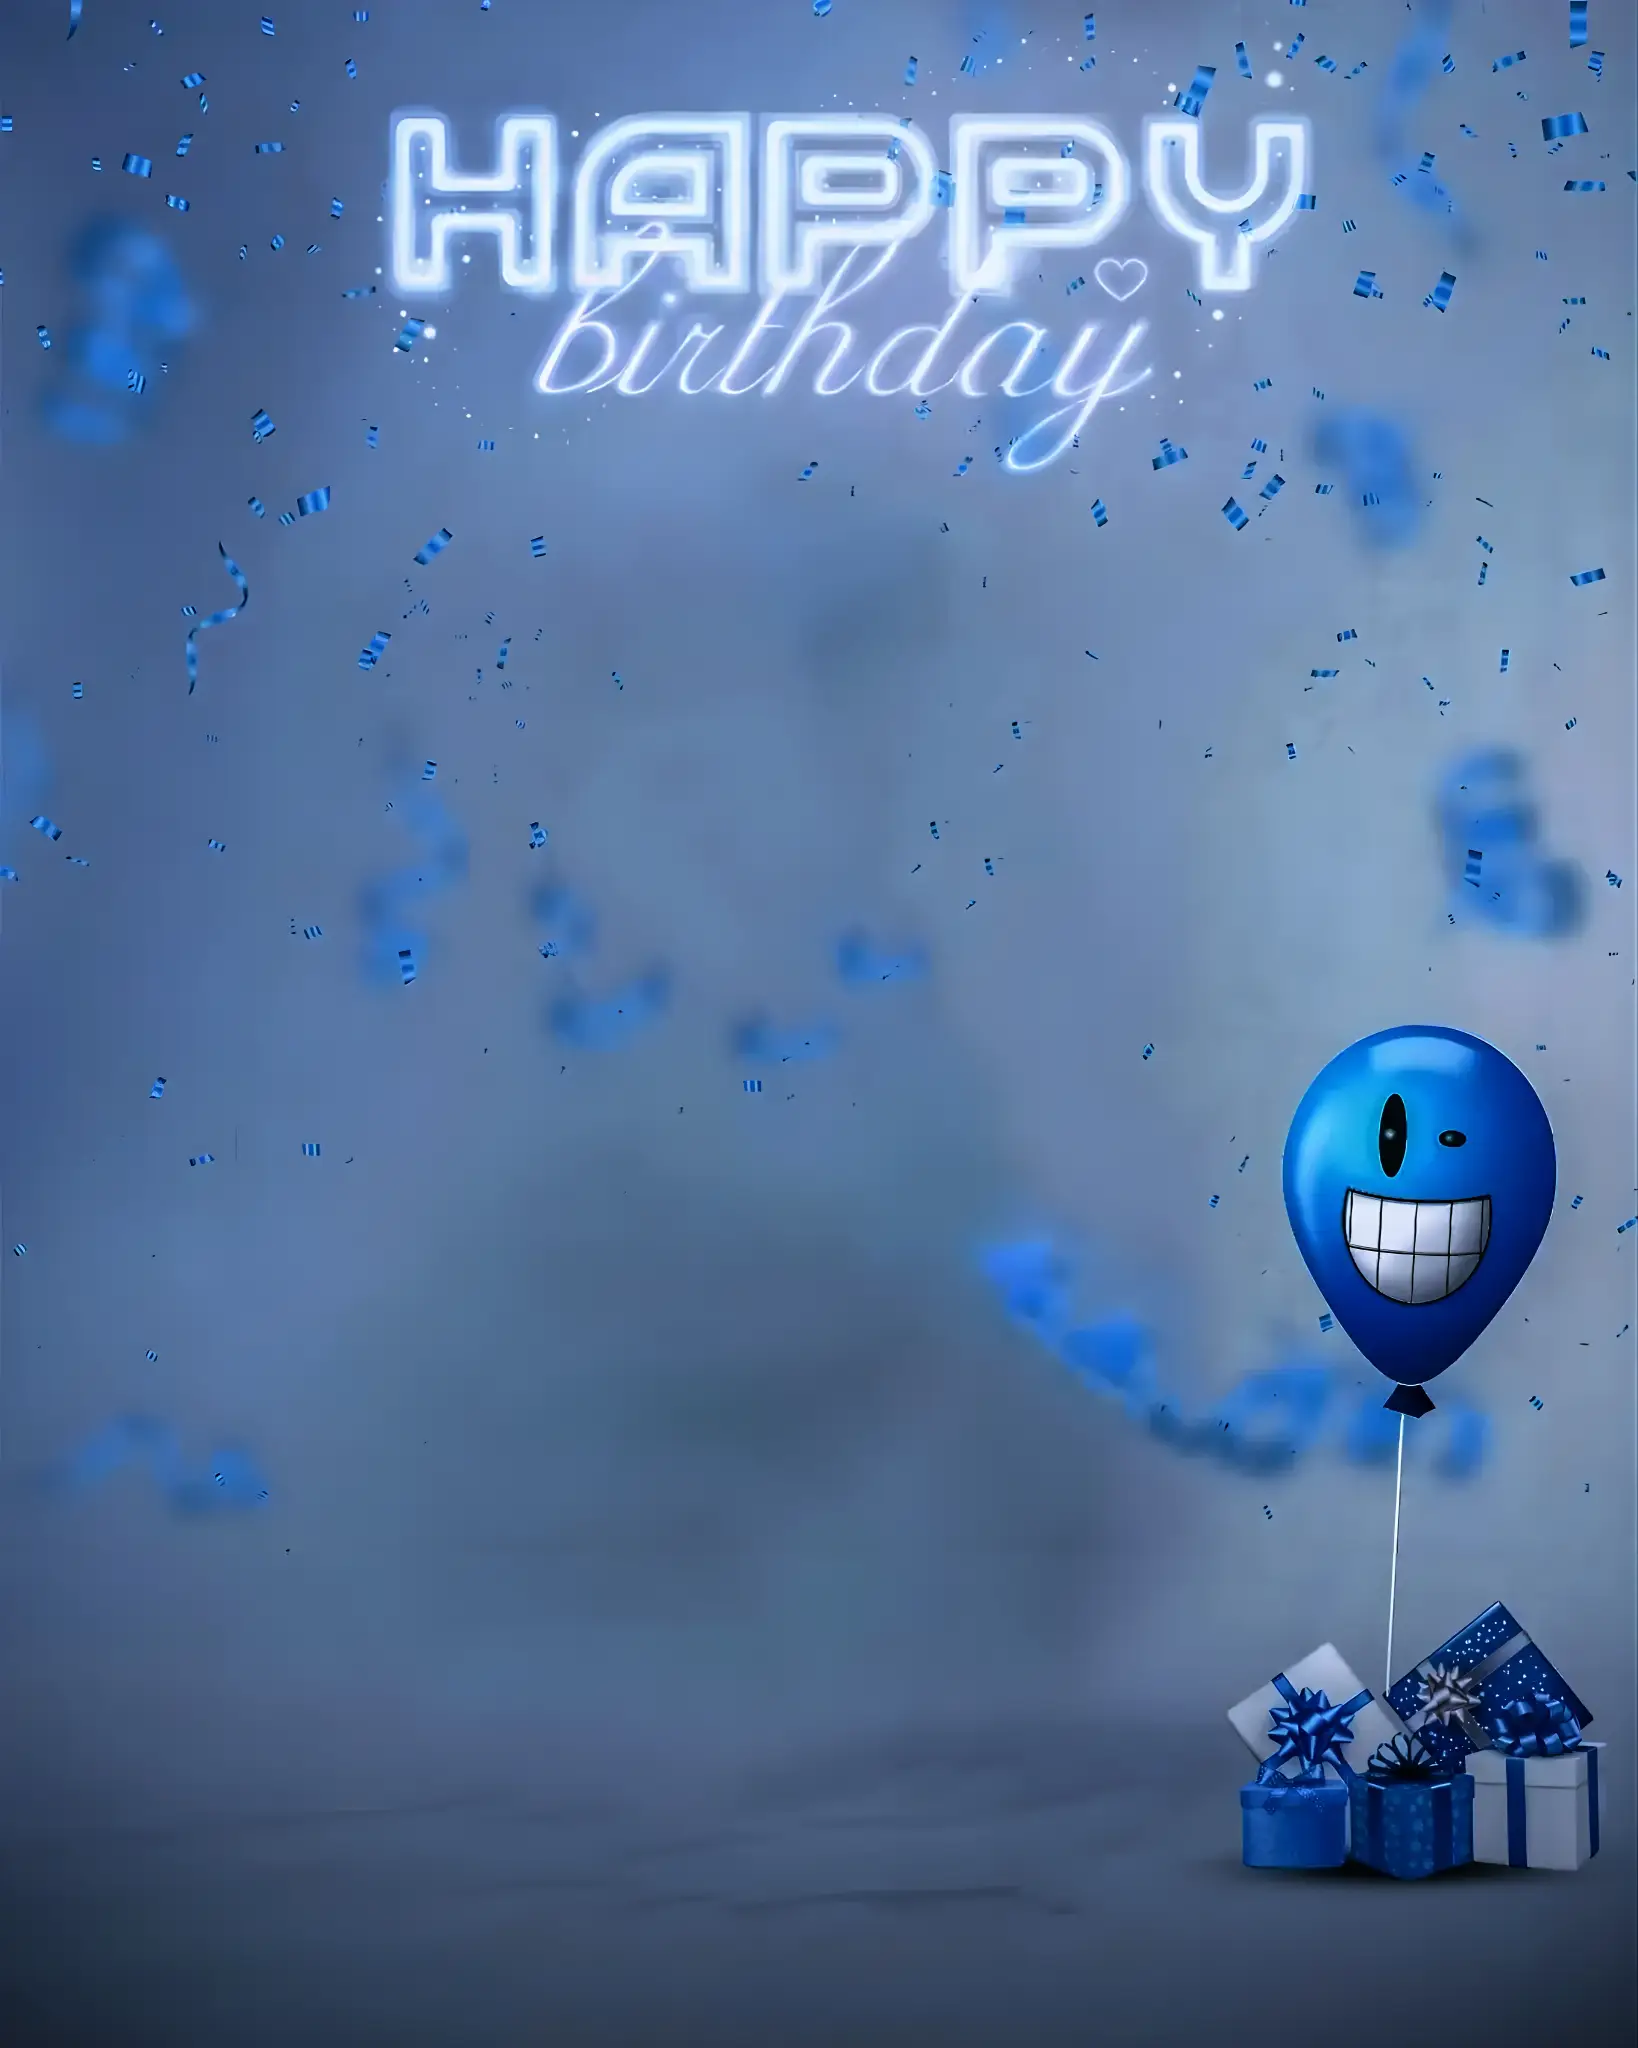 You are currently viewing Happy birthday photo editing background download